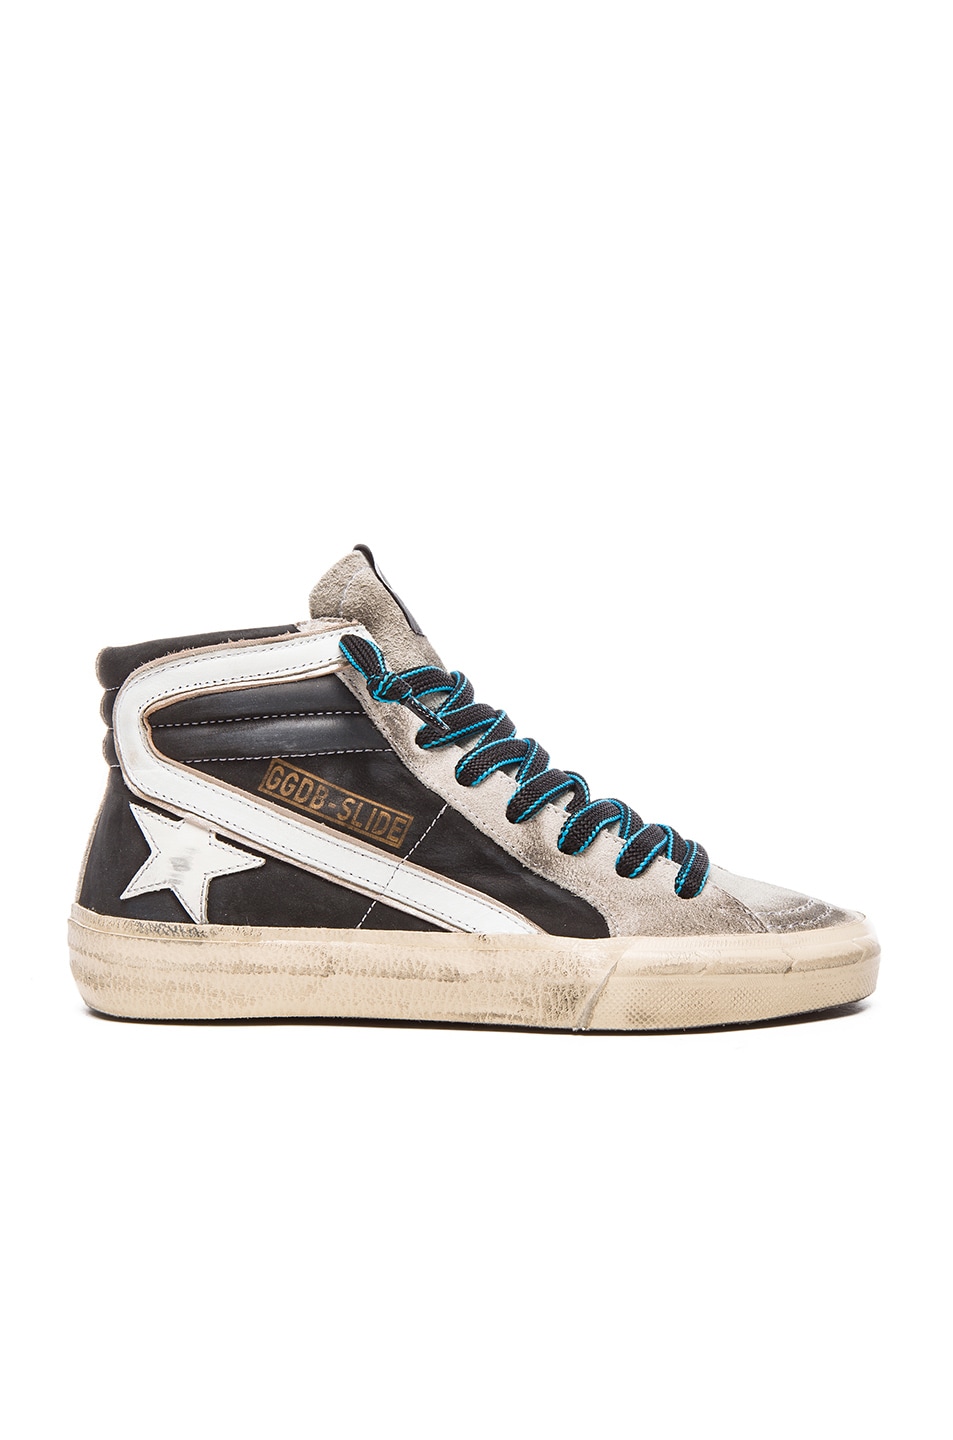 Image 1 of Golden Goose Slide Leather & Suede Sneakers in Black Suede Ice